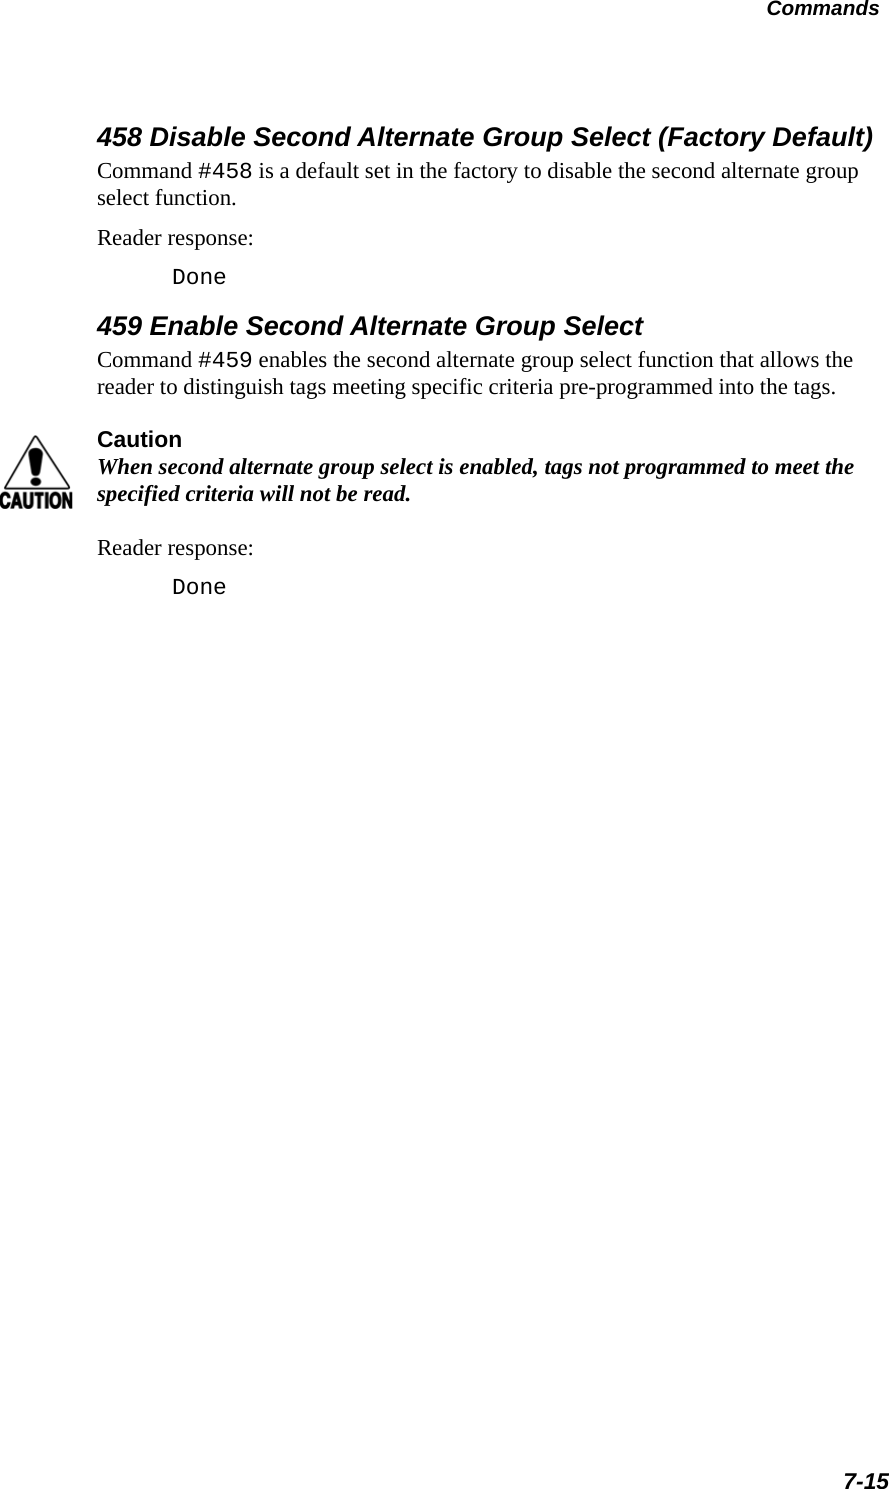 Commands7-15458 Disable Second Alternate Group Select (Factory Default)Command #458 is a default set in the factory to disable the second alternate group select function.Reader response:Done459 Enable Second Alternate Group SelectCommand #459 enables the second alternate group select function that allows the reader to distinguish tags meeting specific criteria pre-programmed into the tags. CautionWhen second alternate group select is enabled, tags not programmed to meet the specified criteria will not be read.Reader response:Done 